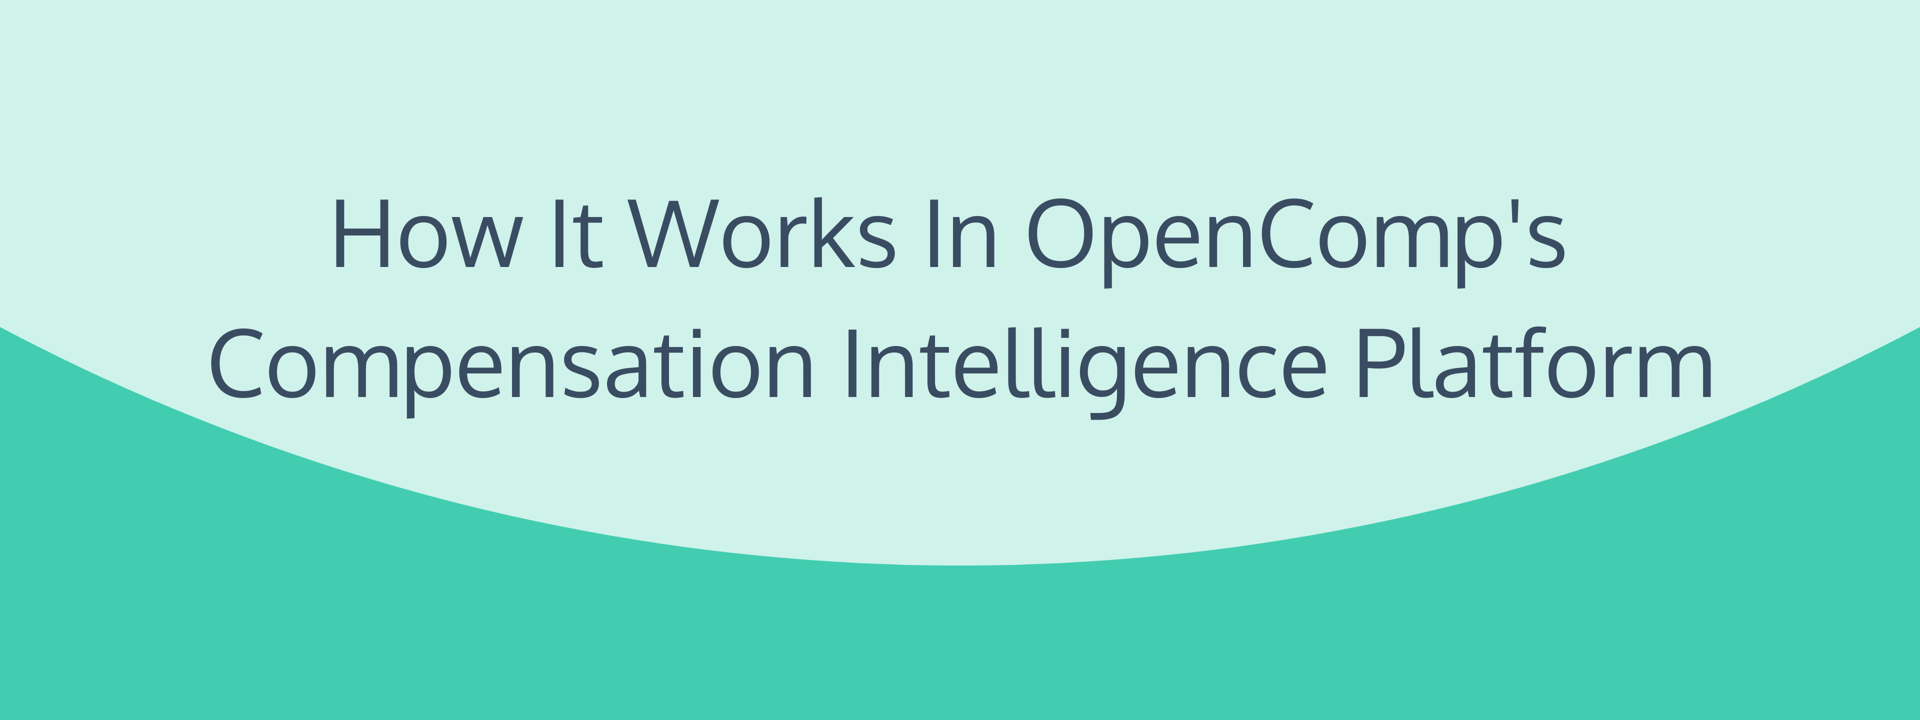 How it Works in OpenComp’s Compensation Intelligence Platform